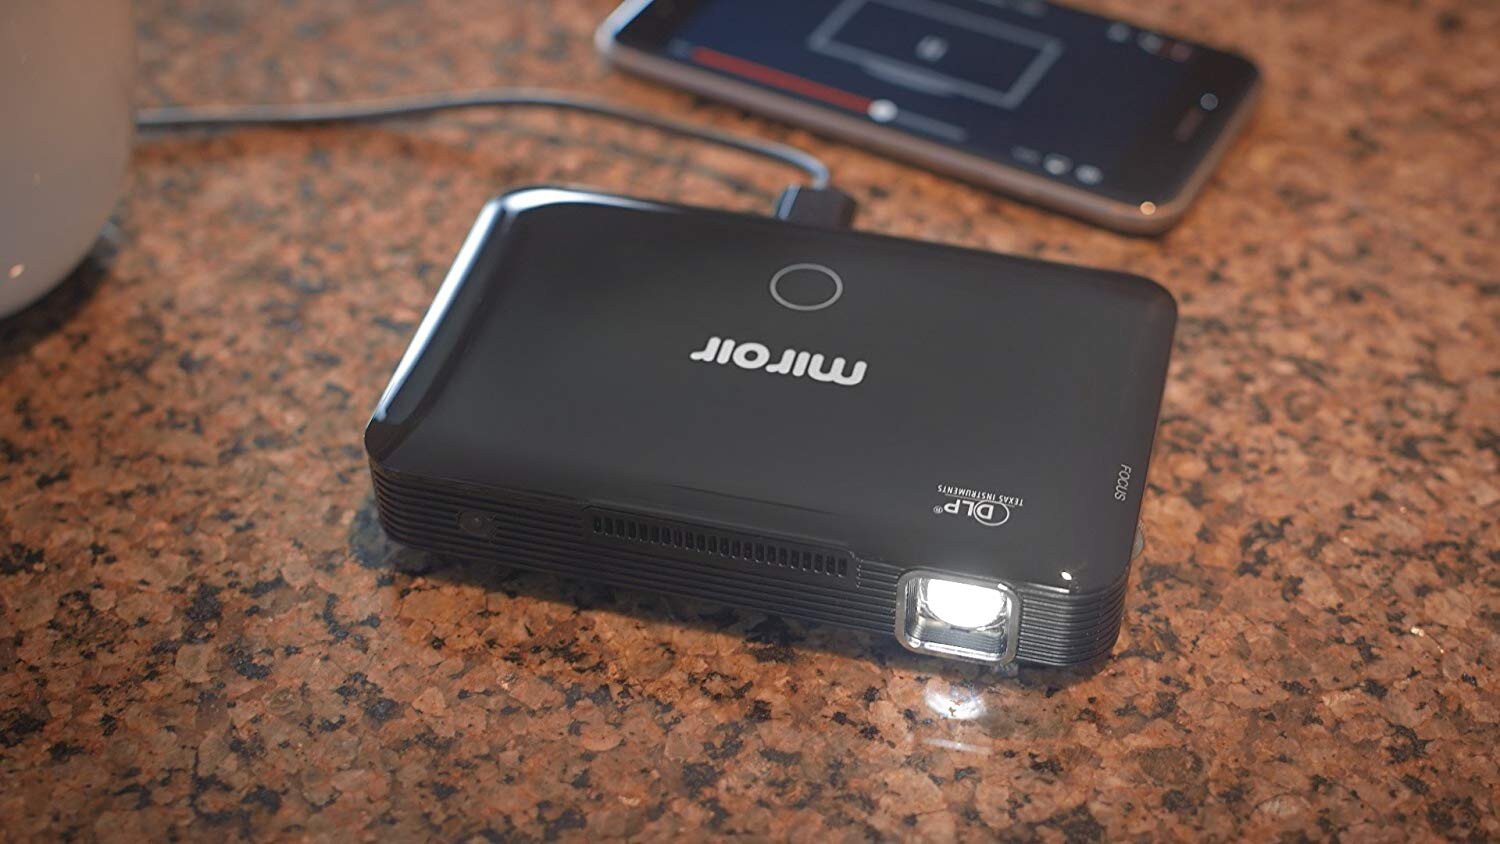 connecting miroir projector to laptop with hdmi